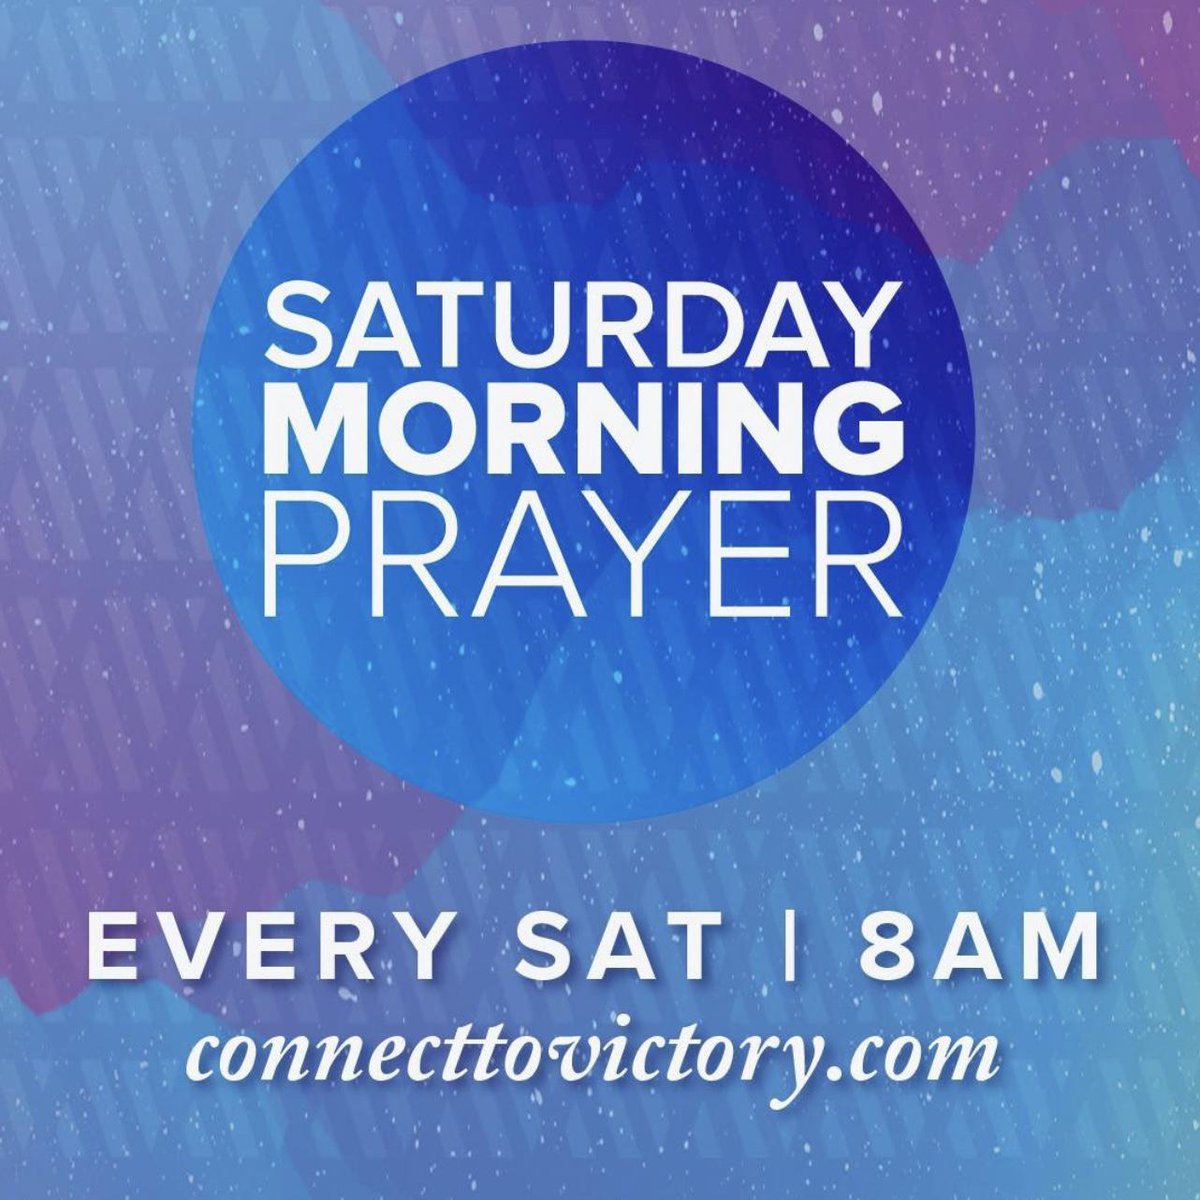 We’re gathering for Saturday Morning Prayer tomorrow, and it’s truly one of our favorite times of the week. 🩵 We want to see you there! So, invite a friend and join us. Can’t wait to see your smiling face! 😄 In person or online ⛪ 💻 | 8am ET victoryatl.com/prayer